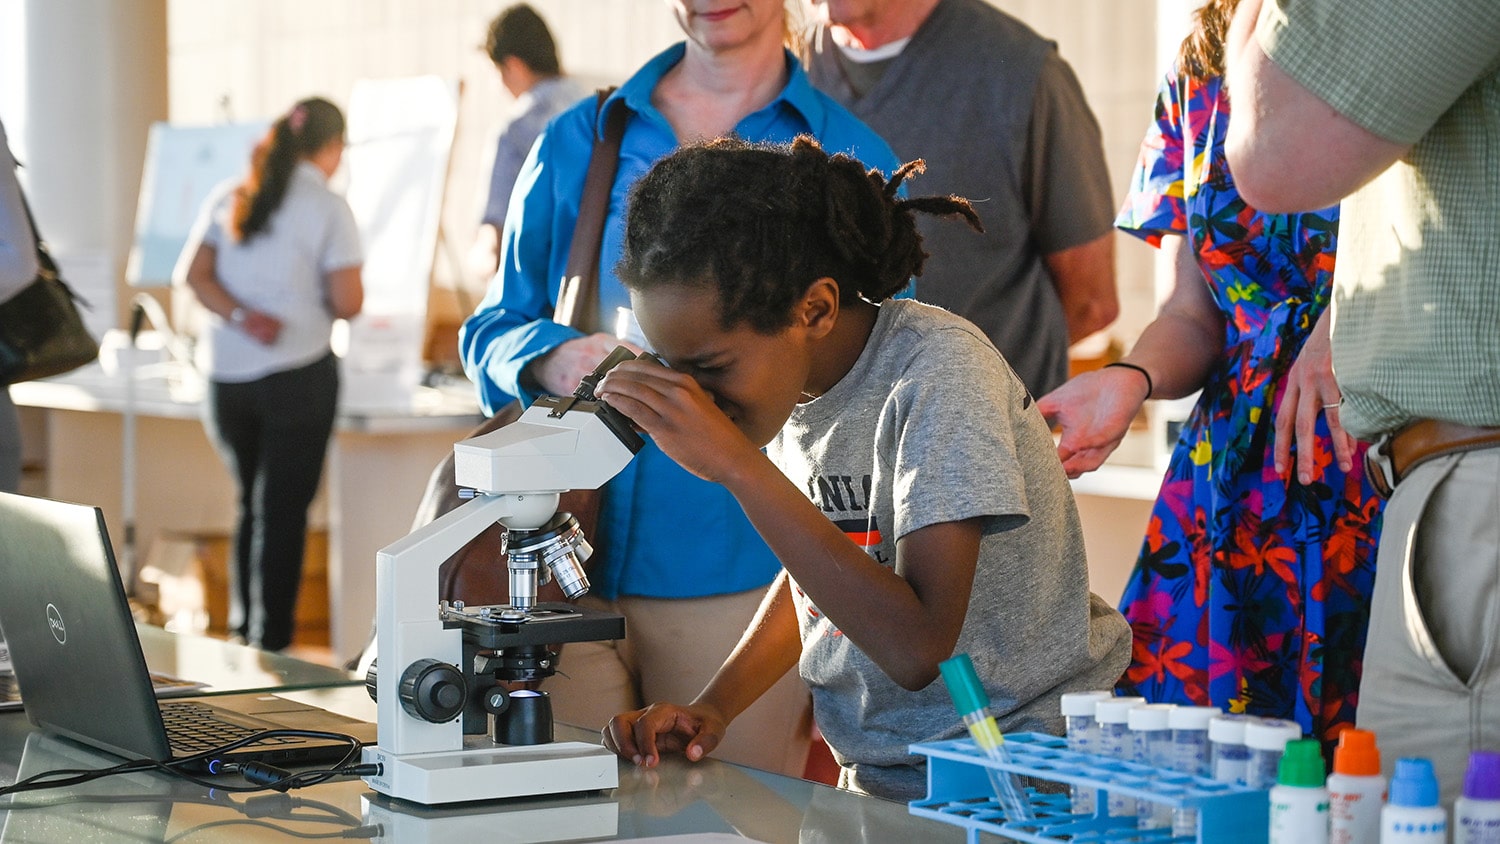 A young girl looks through a microscope at the 2023 State of the Sciences event